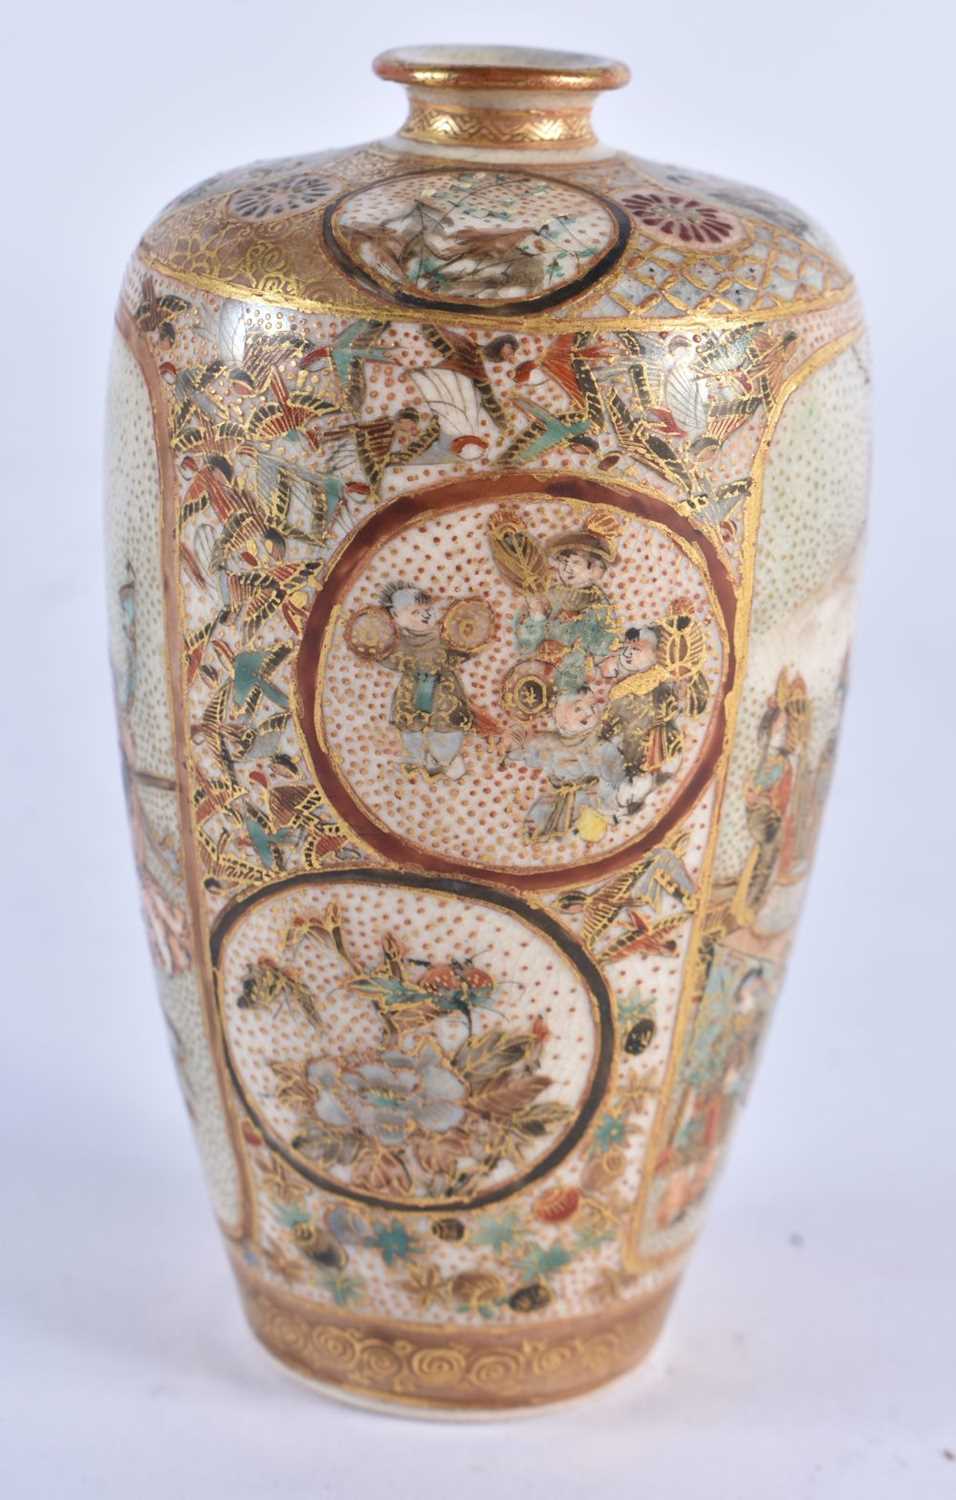 A SMALL 19TH CENTURY JAPANESE MEIJI PERIOD SATSUMA POTTERY VASE painted with figures and birds - Image 2 of 14